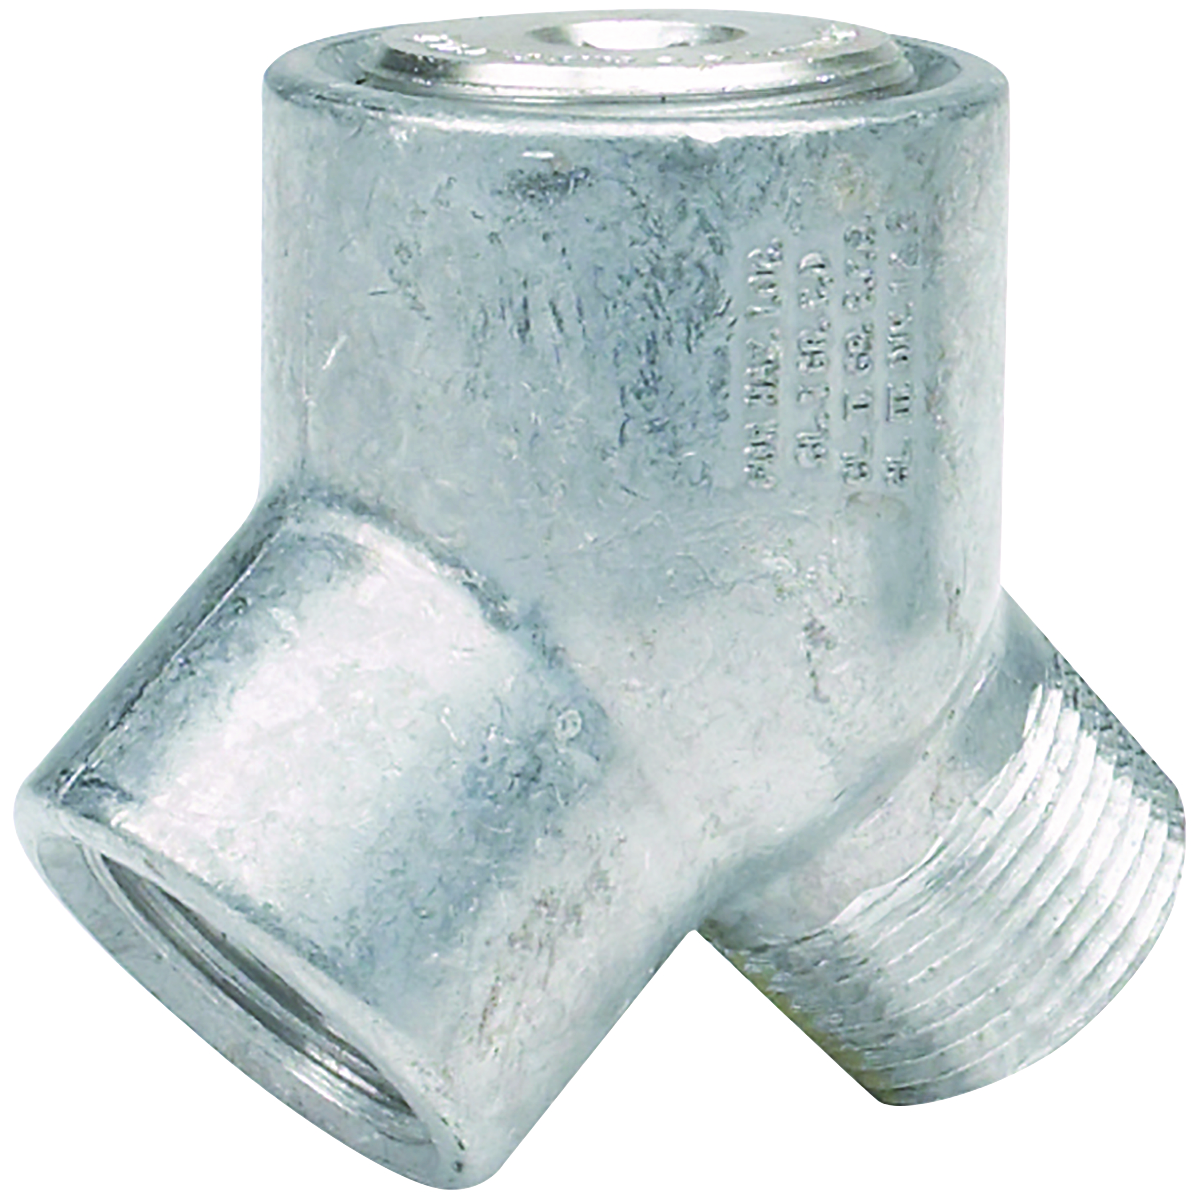 EYMF SERIES - ALUMINUM ATEX AND IECEX CERTIFIED 90-DEGREE PLUGGED ELBOW- MALE/FEMALE - HUB SIZE 3/4 INCH